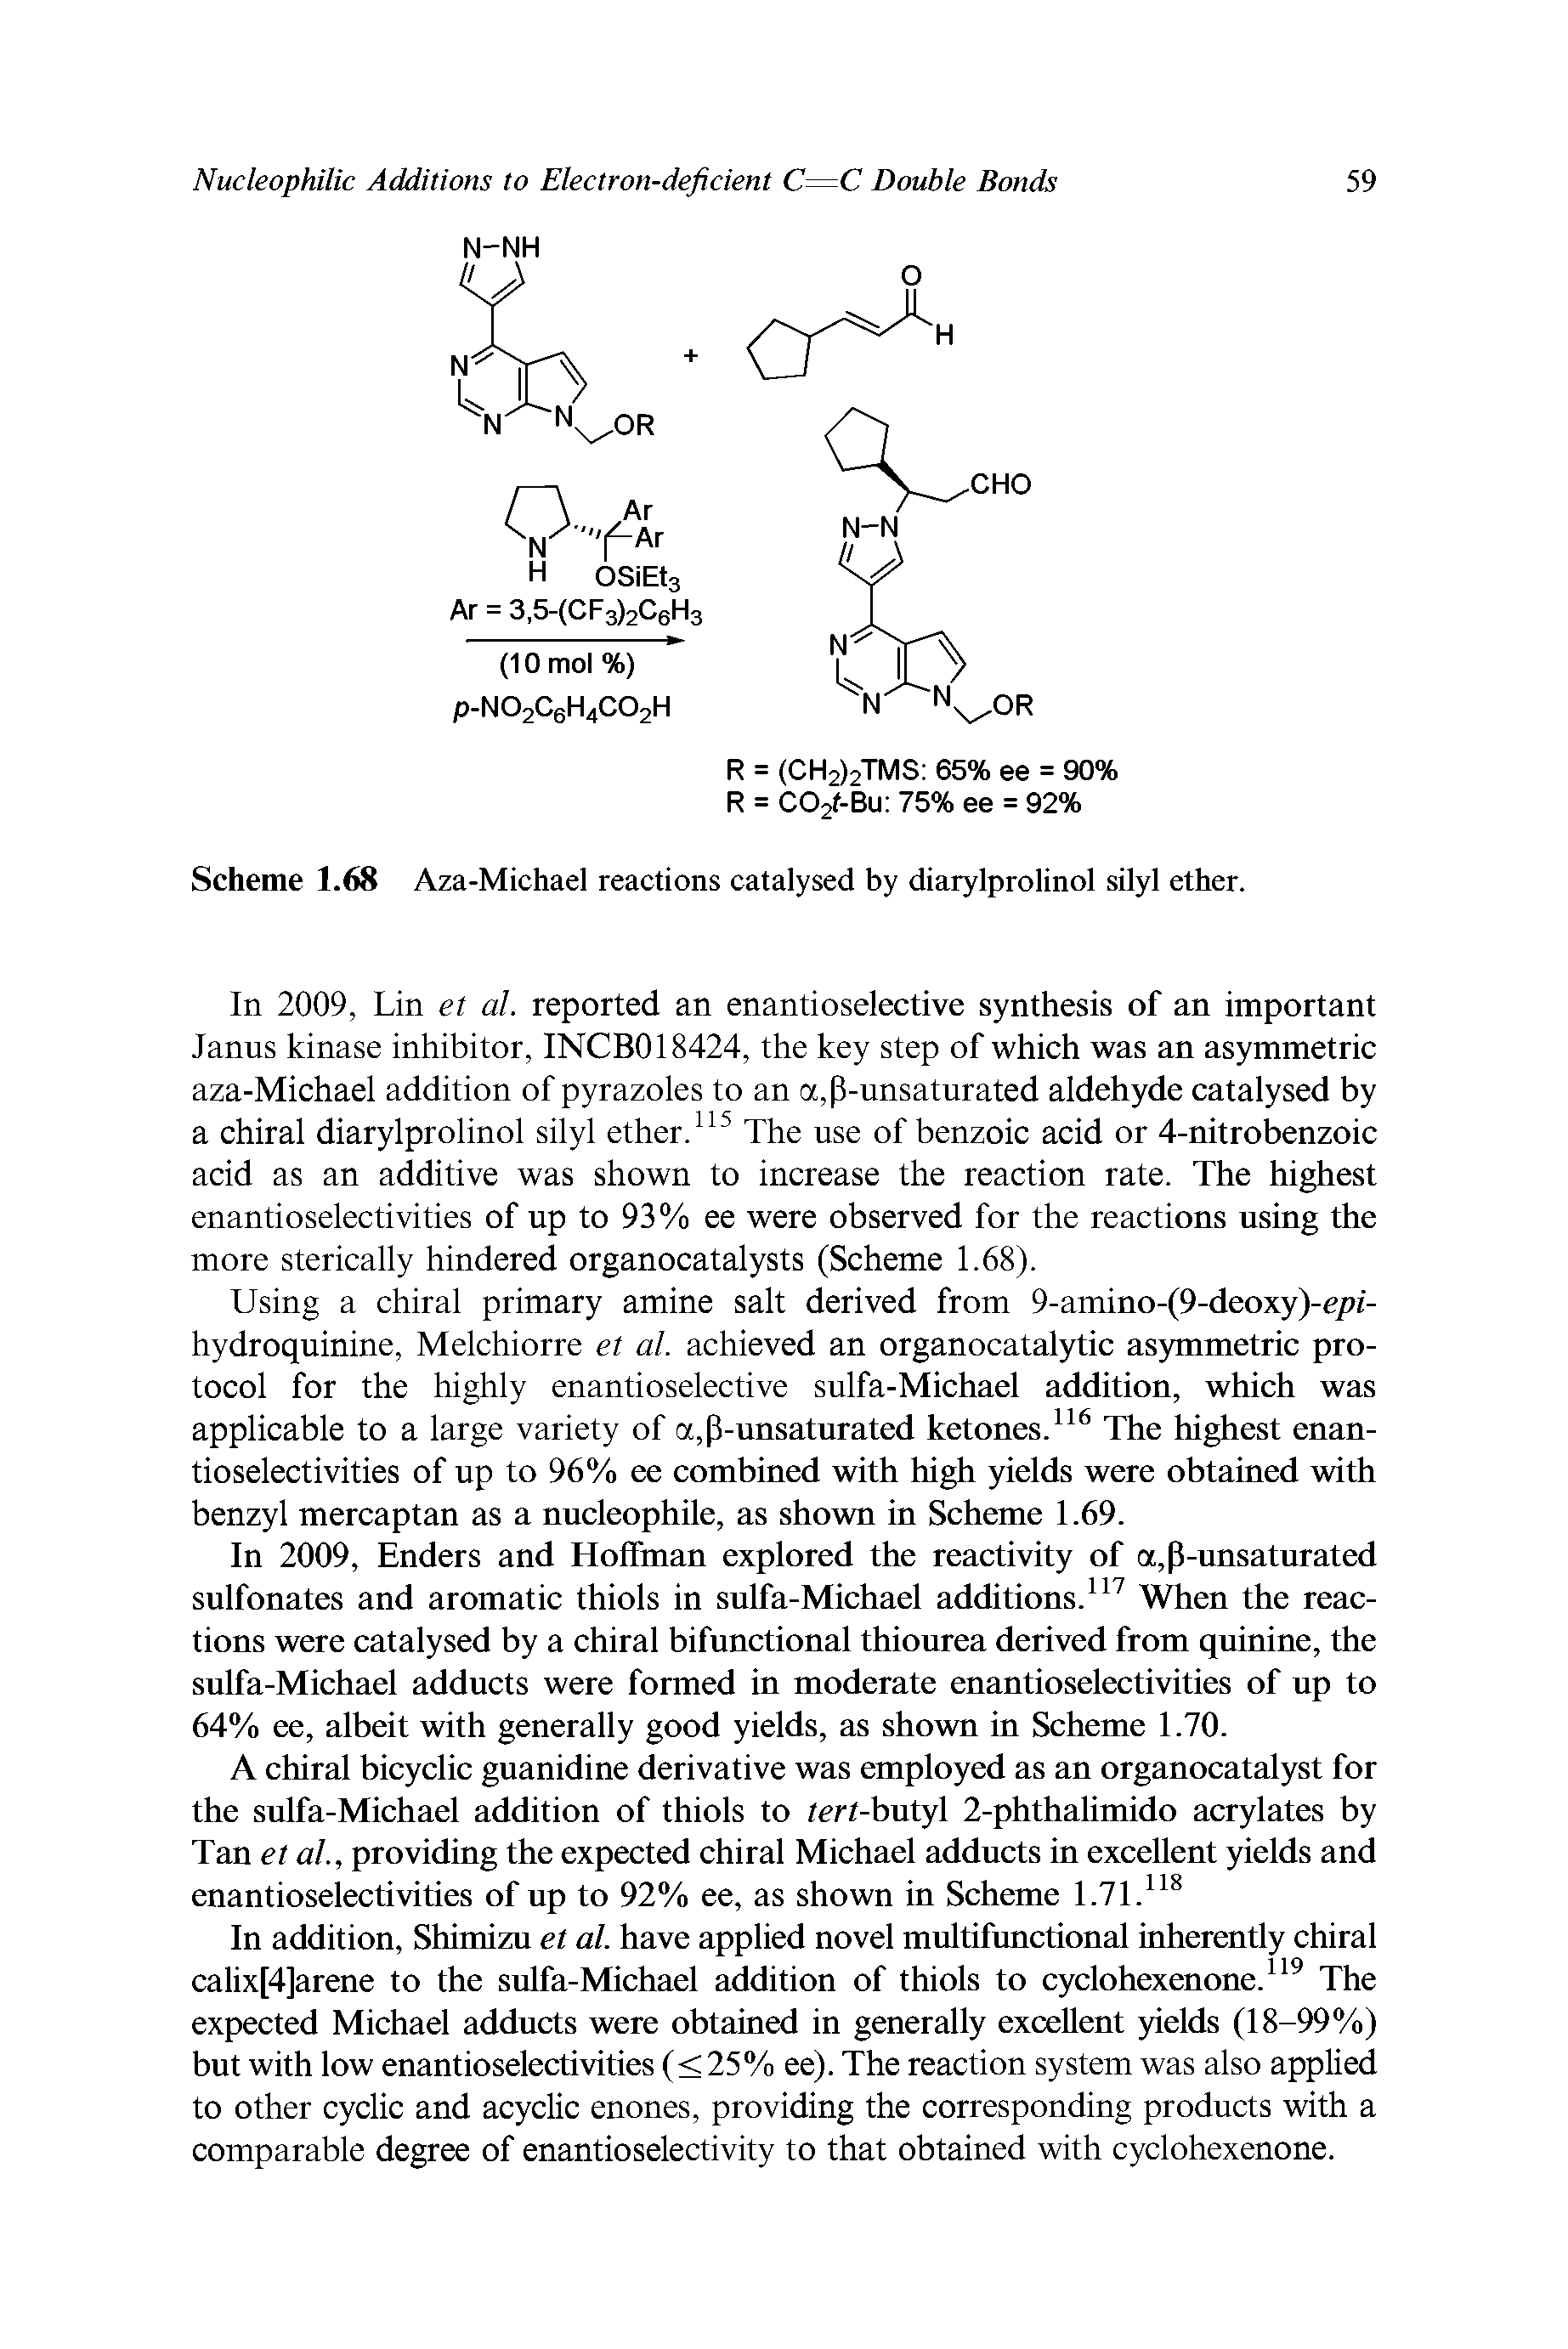 Scheme 1.68 Aza-Michael reactions catalysed by diarylprolinol silyl ether.